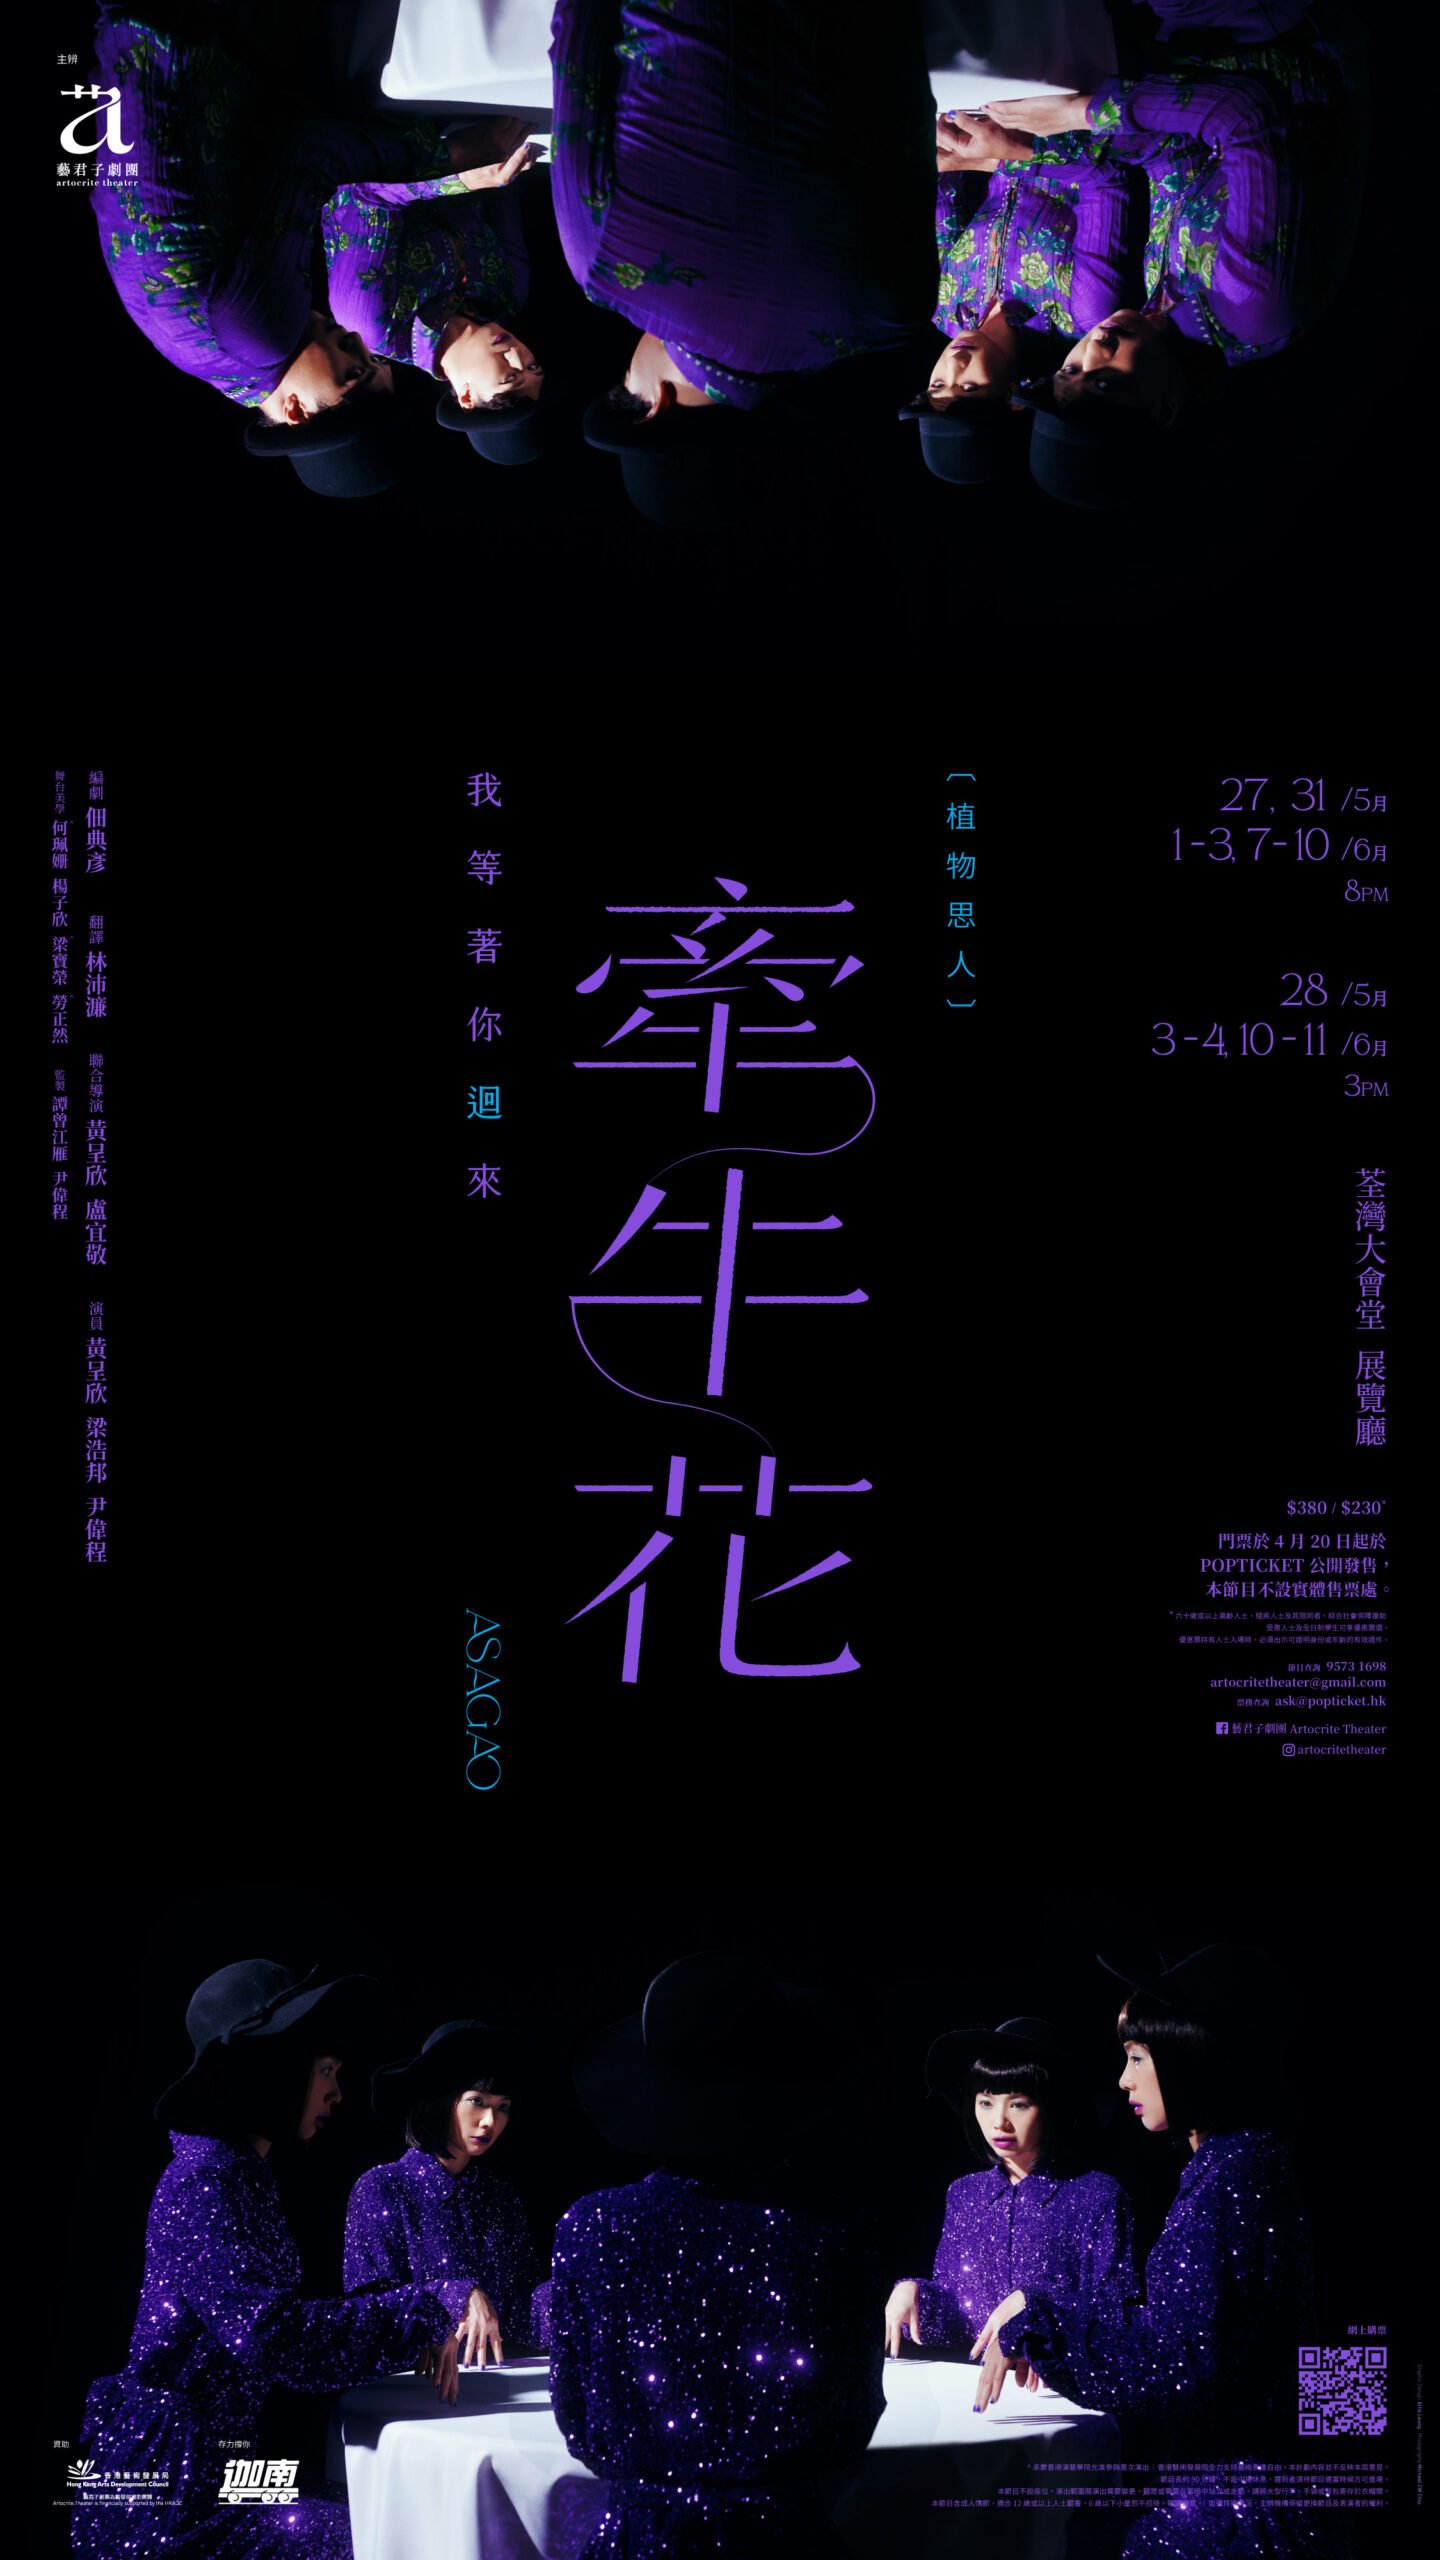 Asagao_poster_1080x1920px-01-scaled.jpg